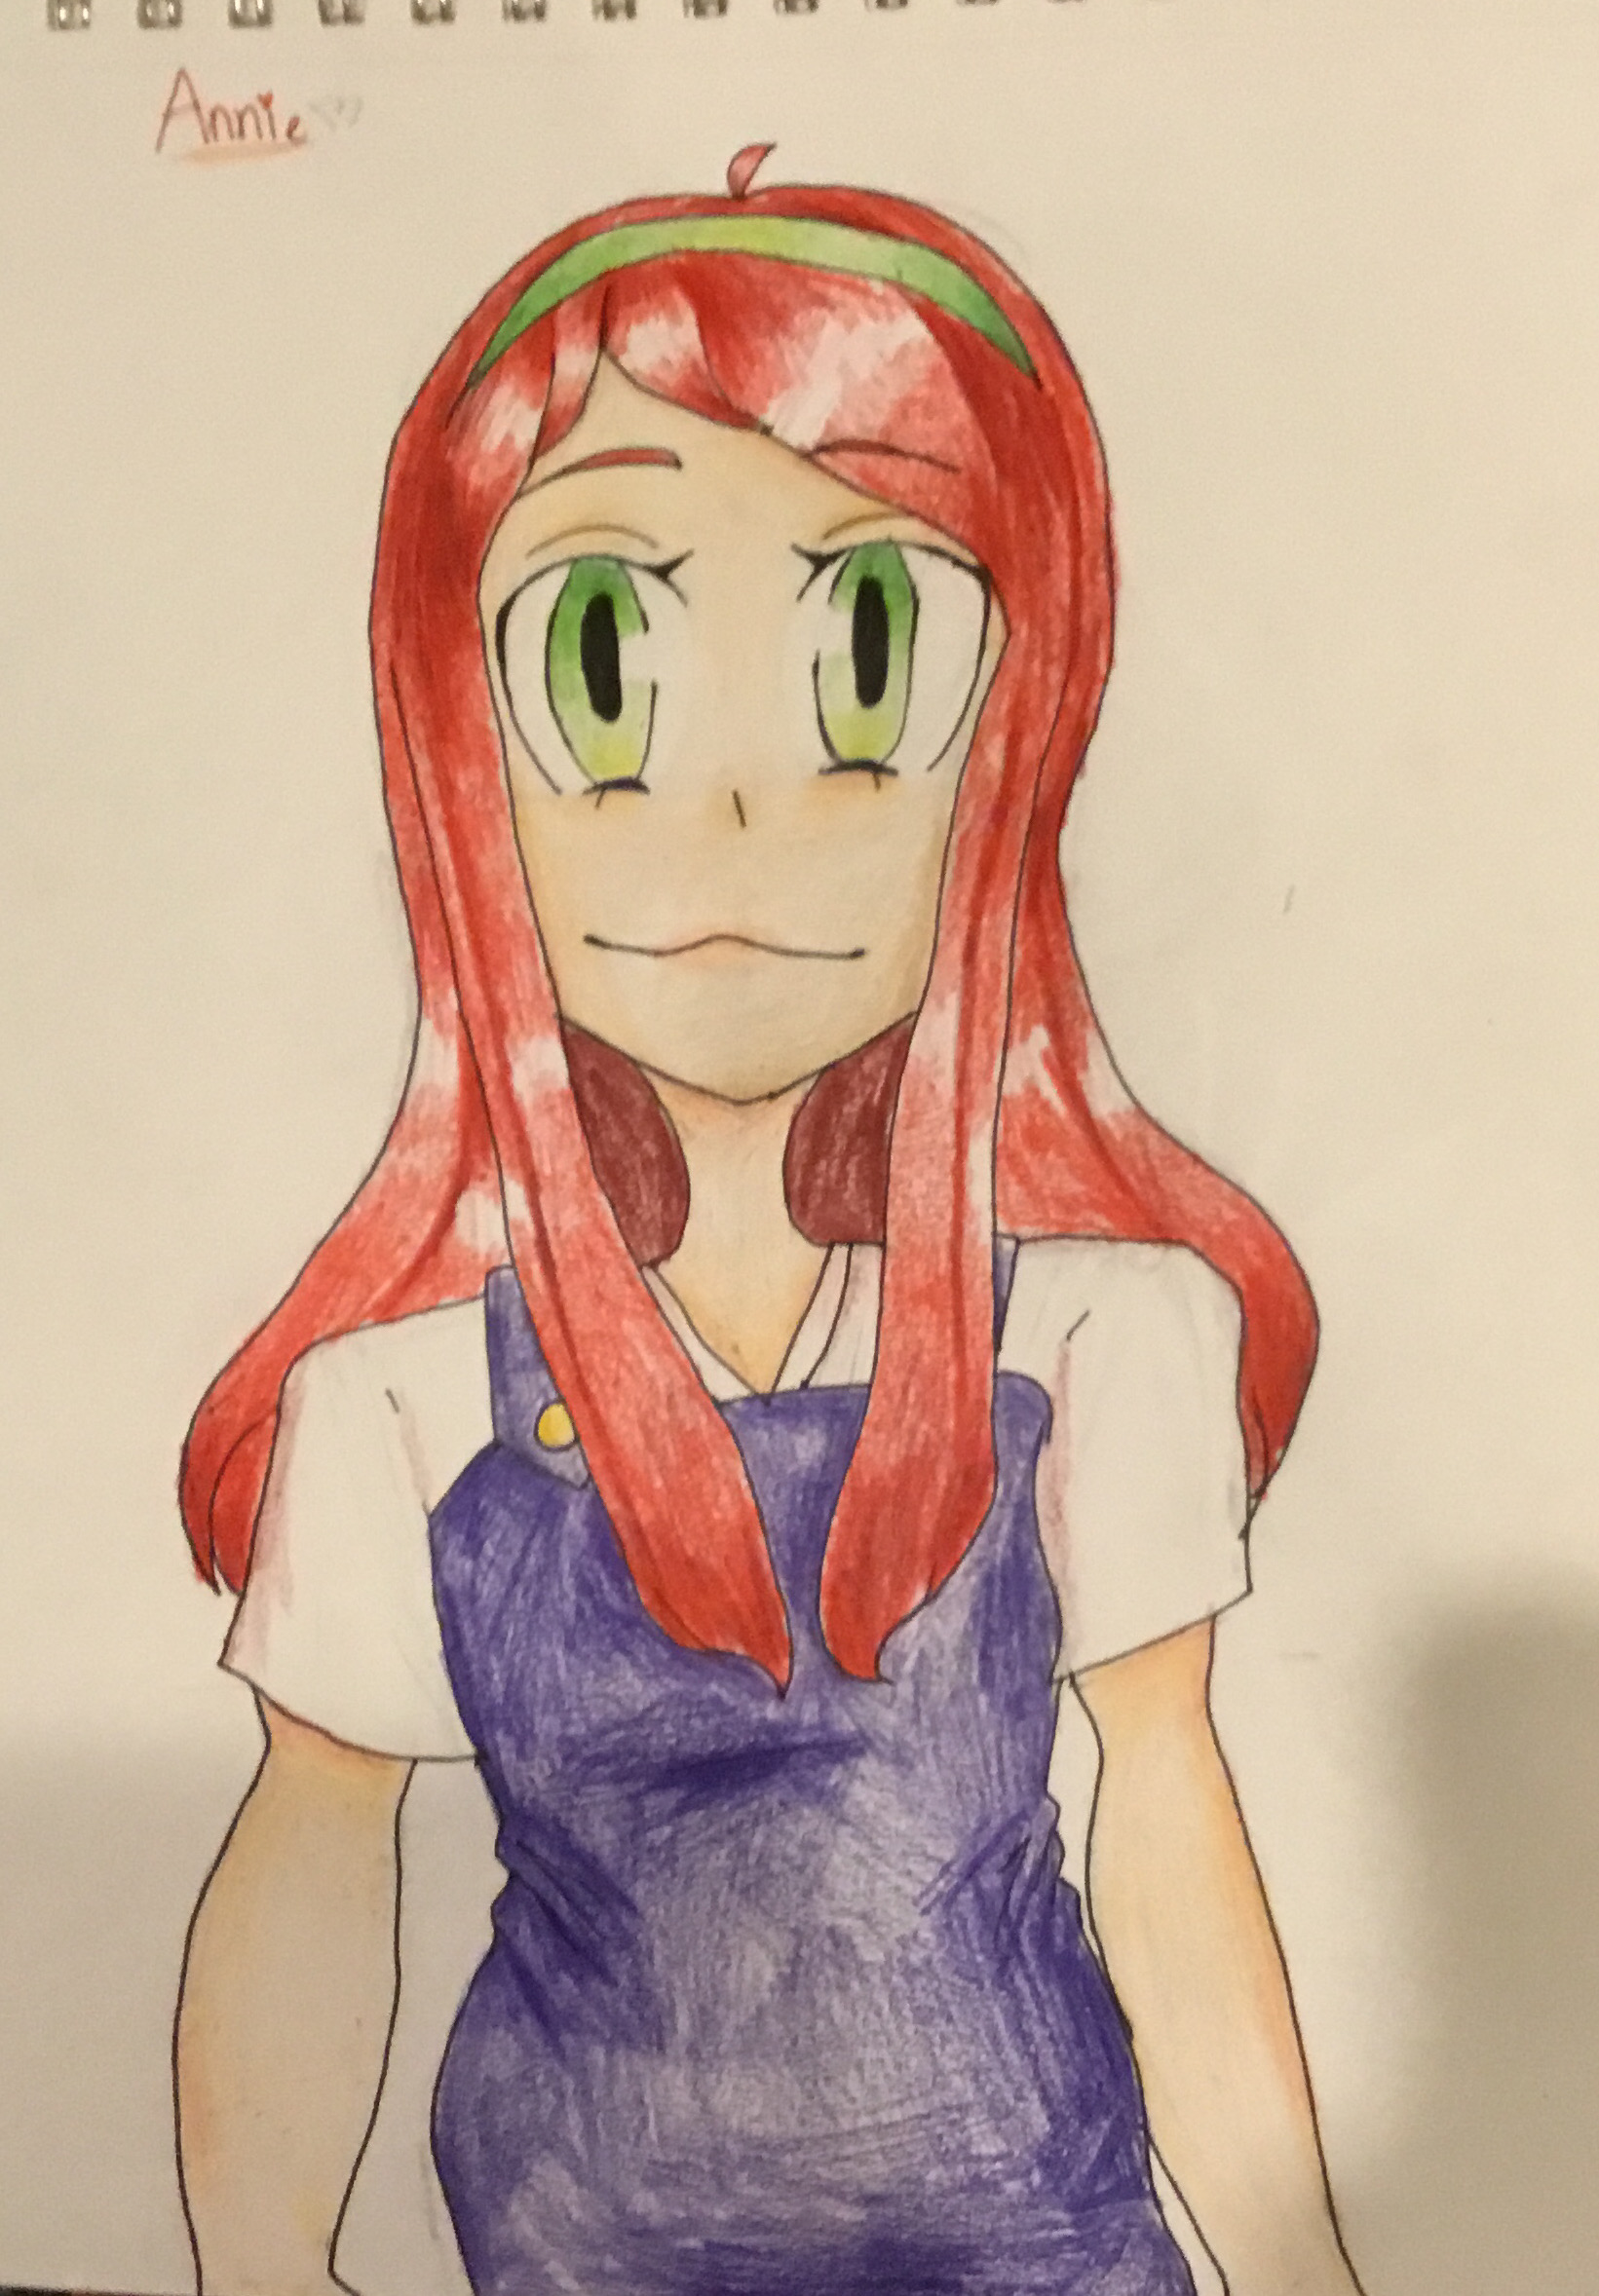 Robloxcharacter Roblox Girl Overalls A Image By Leafyy - roblox girl roblox drawing template